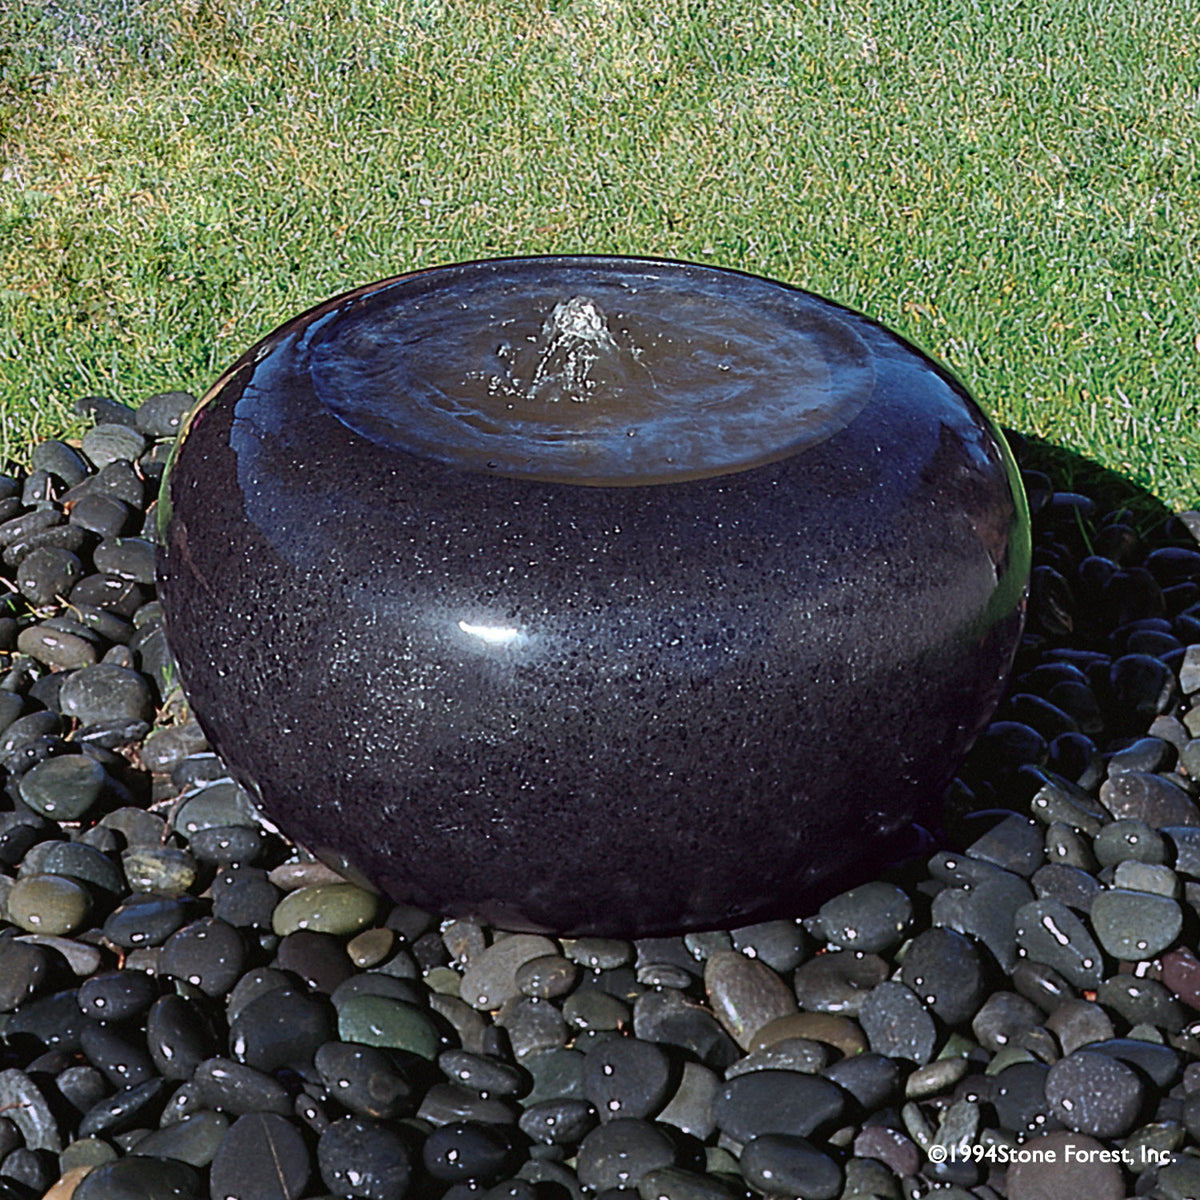 Stone Forest Bowl garden fountain carved from black granite image 1 of 1